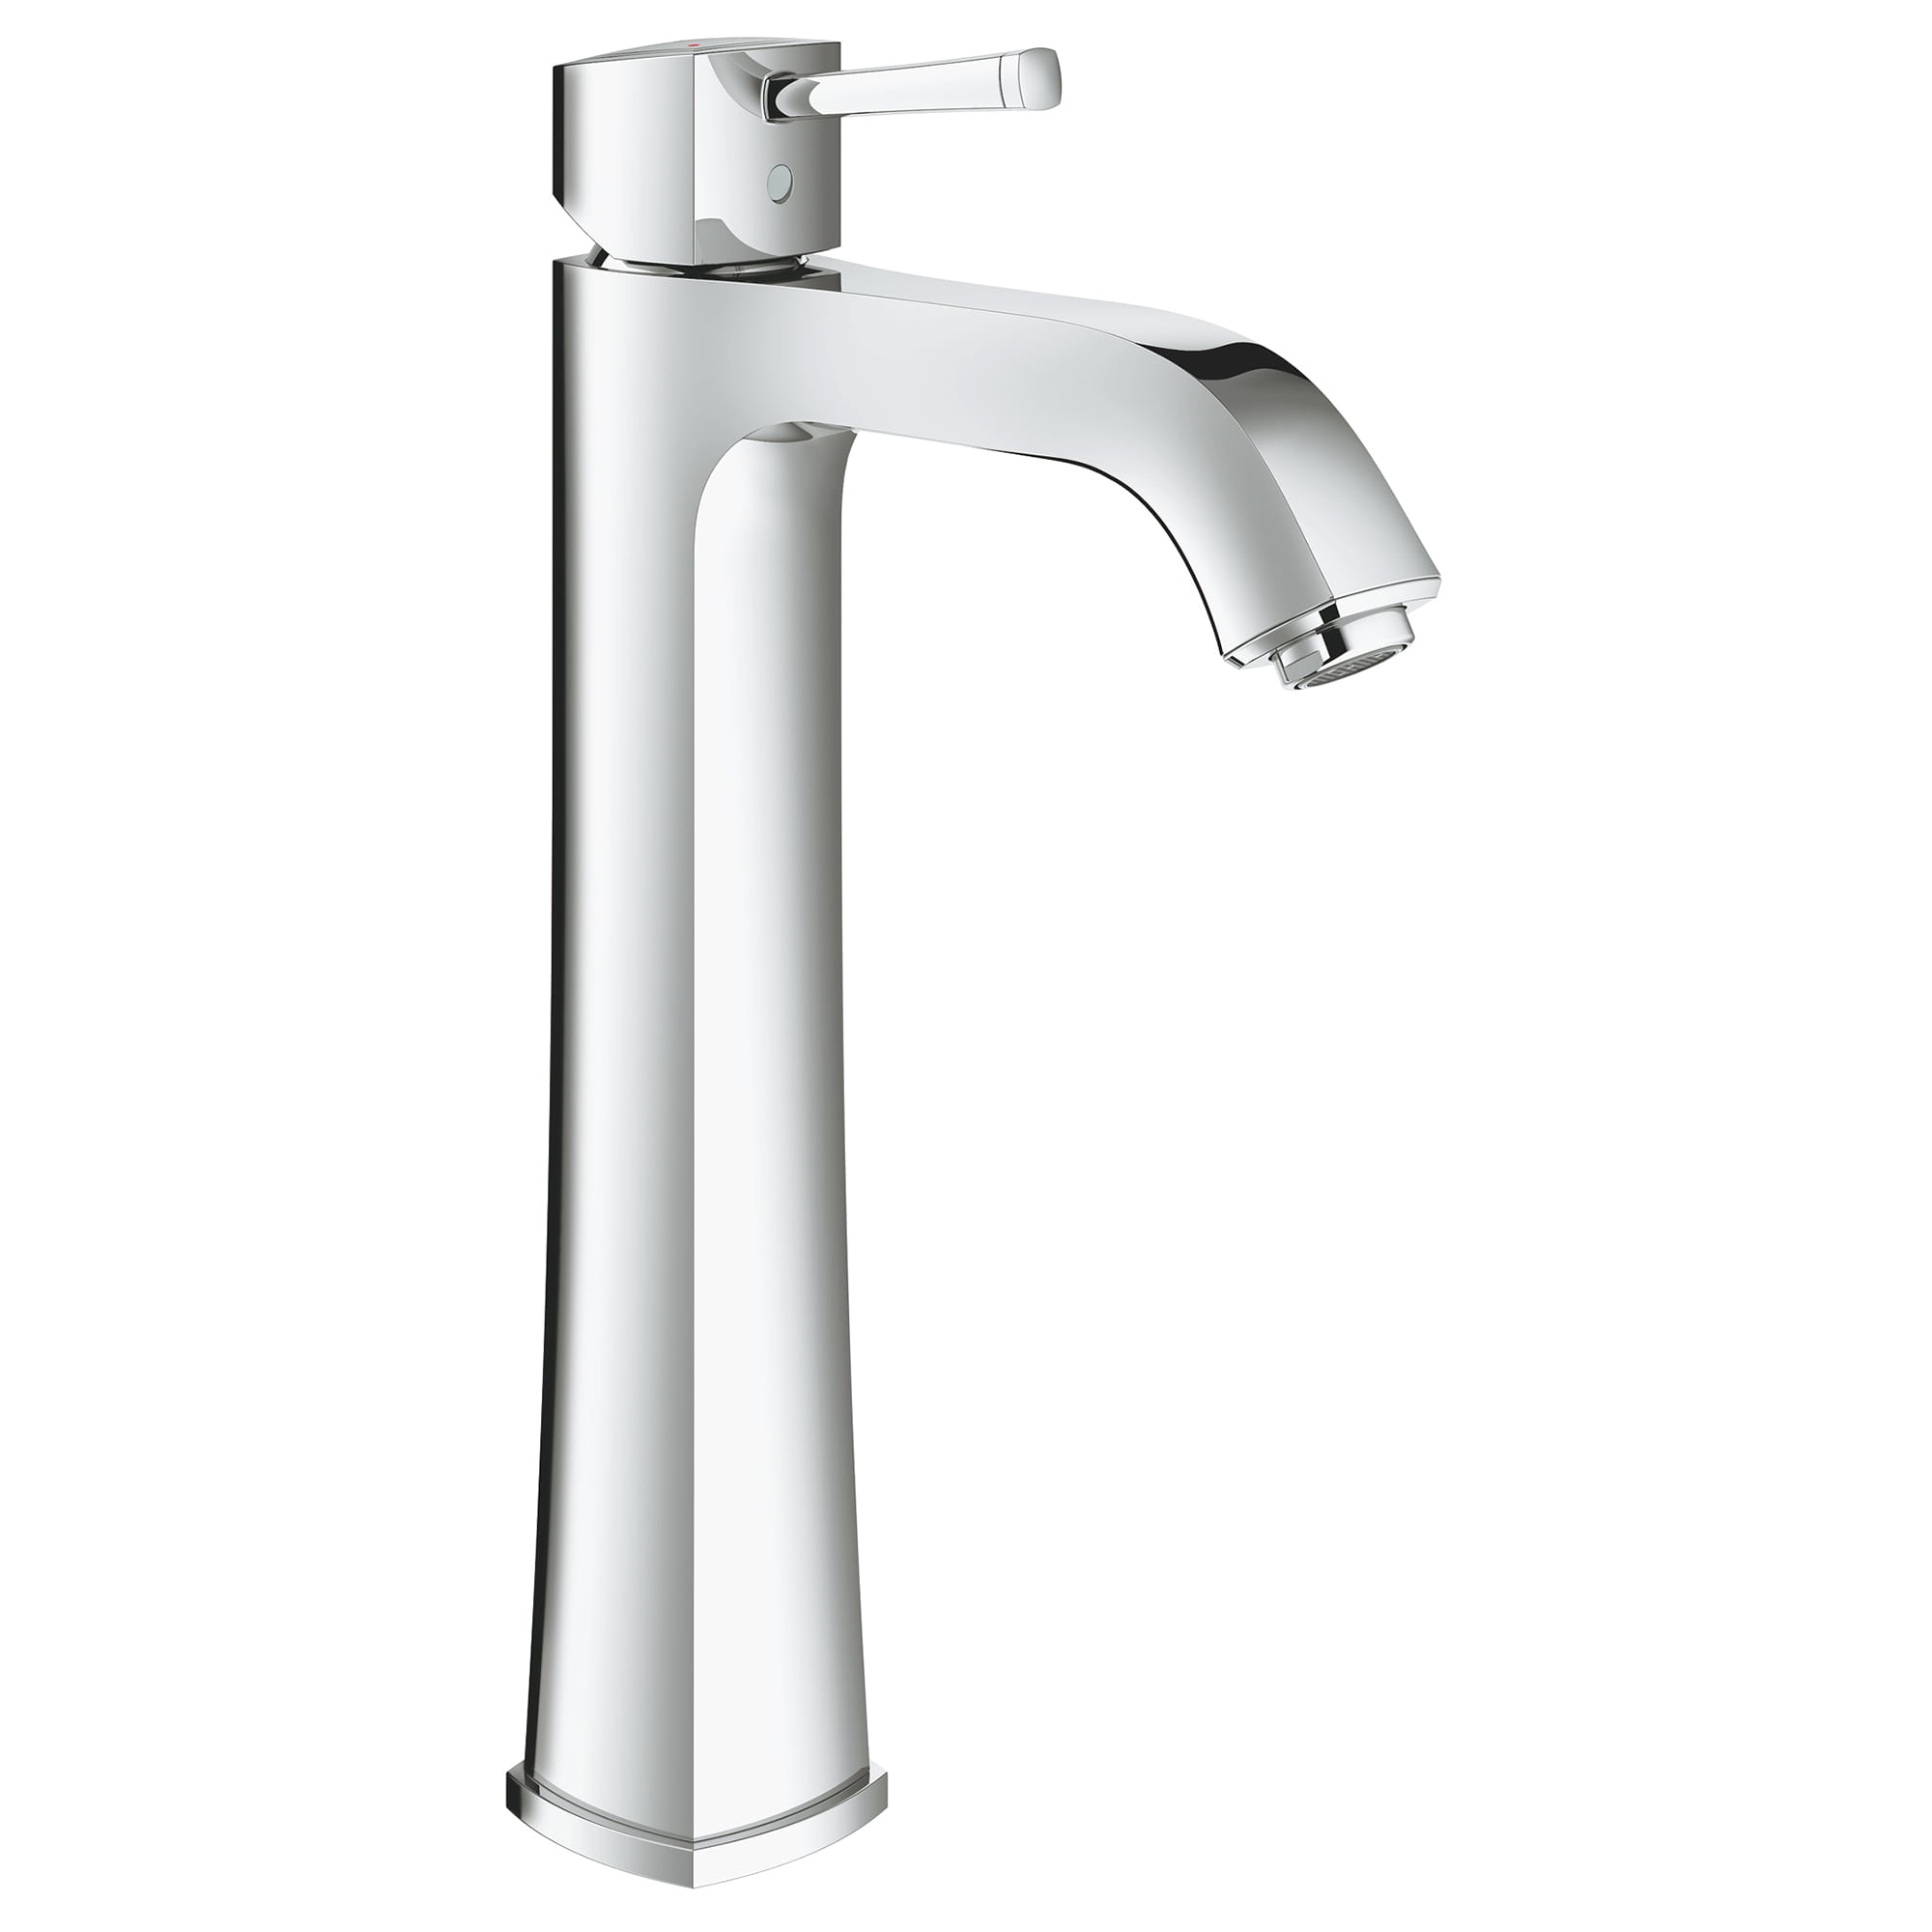 Single Hole Single Handle Deck Mount Vessel Sink Faucet 12 GPM GROHE BRUSHED NICKEL